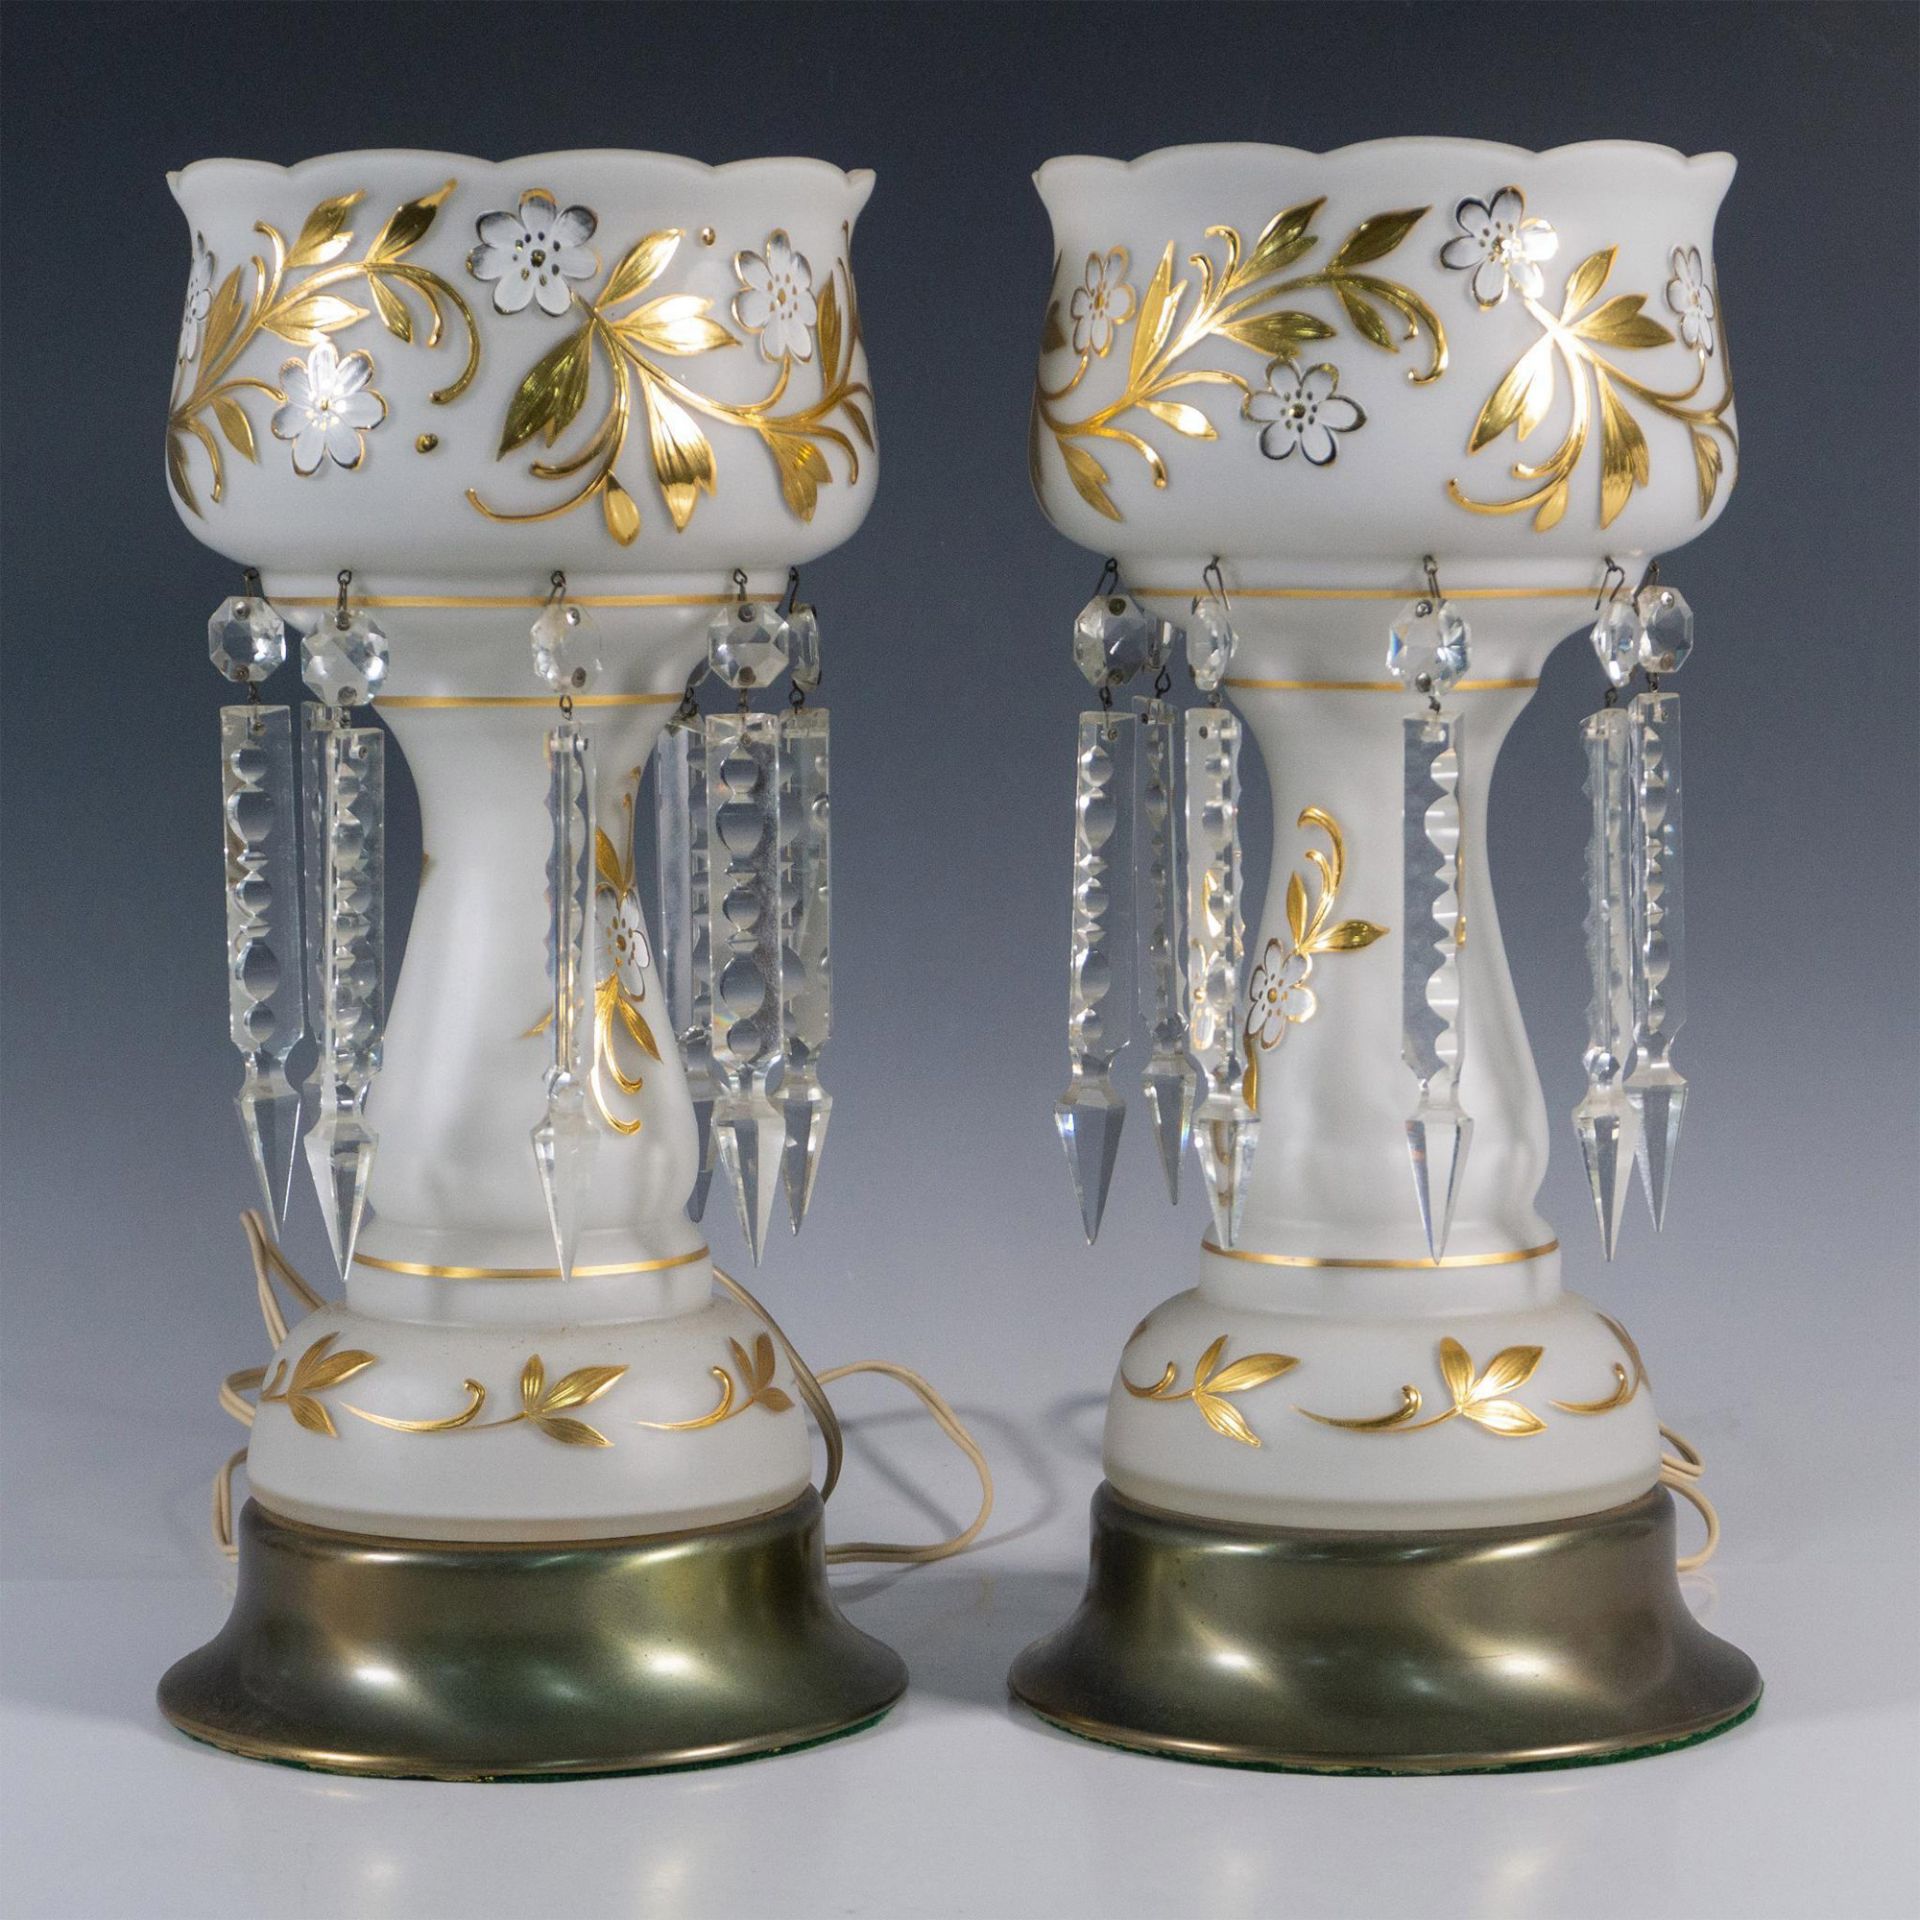 Pair of Handpainted Satin Glass Lamps with Hanging Crystals